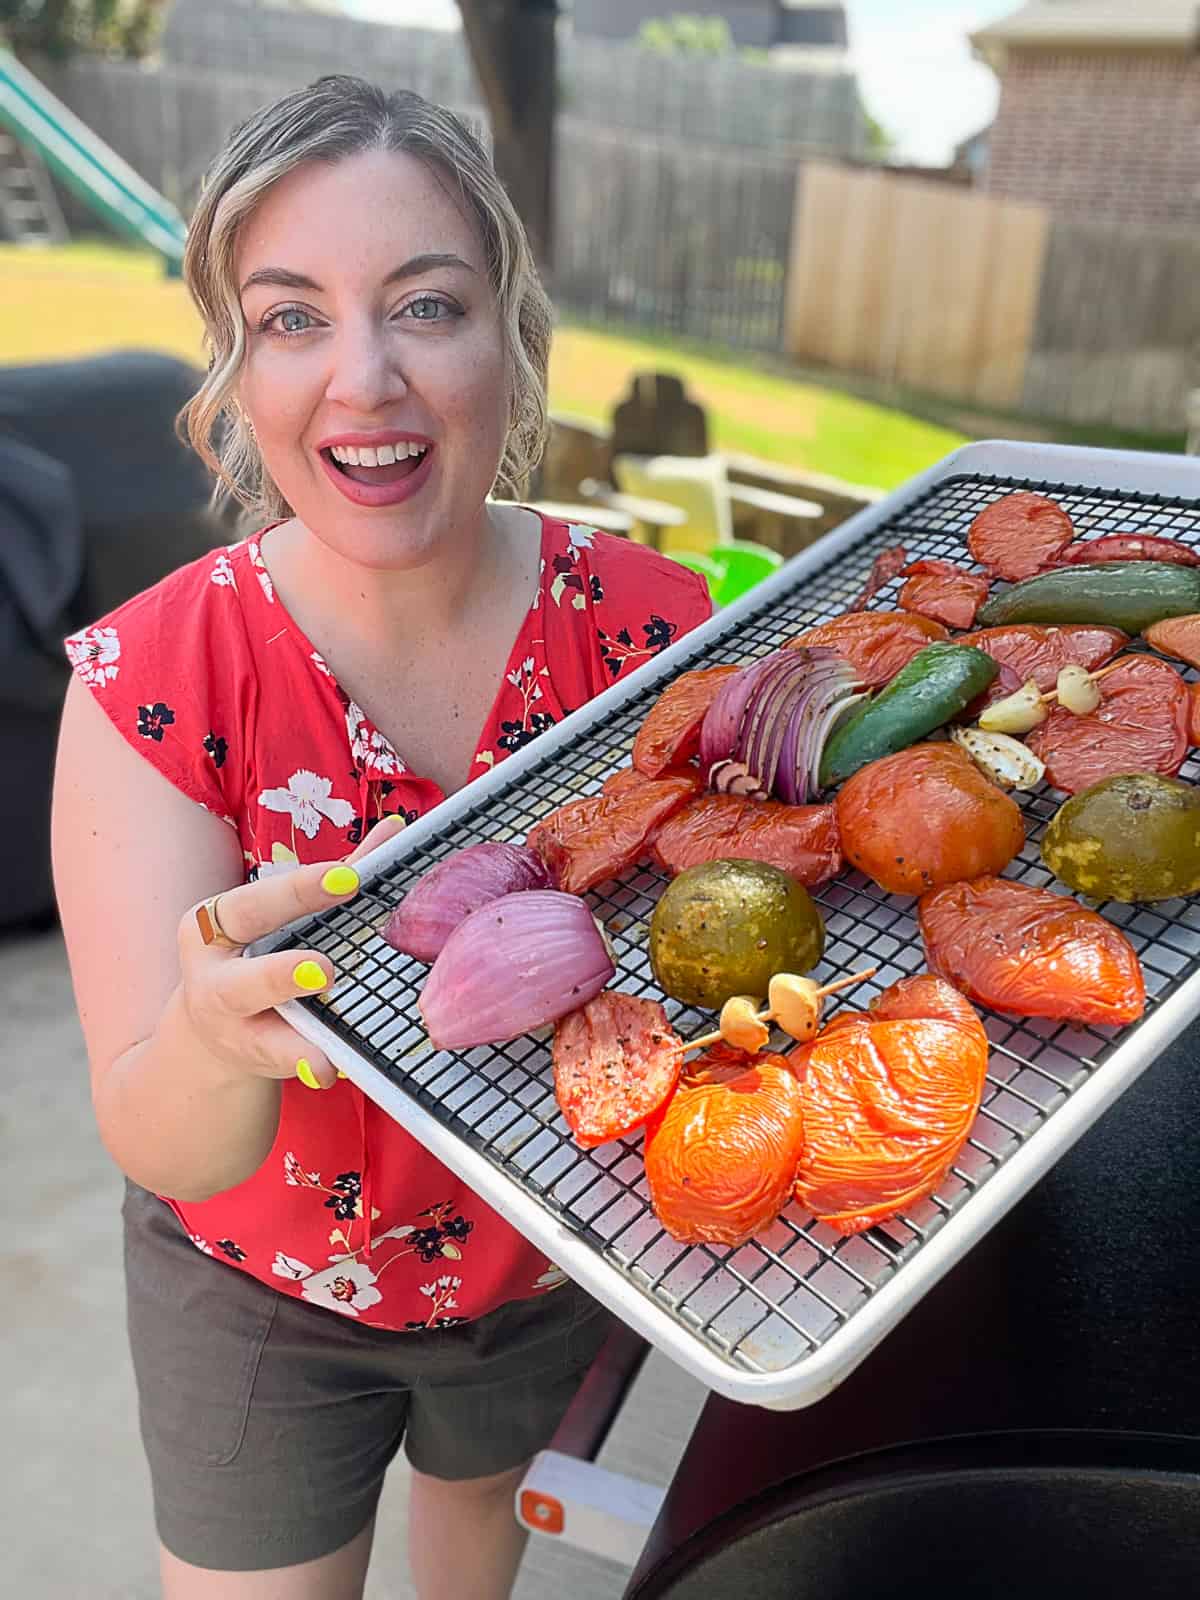 Traeger smoked salsa recipe Appetizer For A Taco Night Party with Jenna Passaro Food Blogger from Sip Bite Go